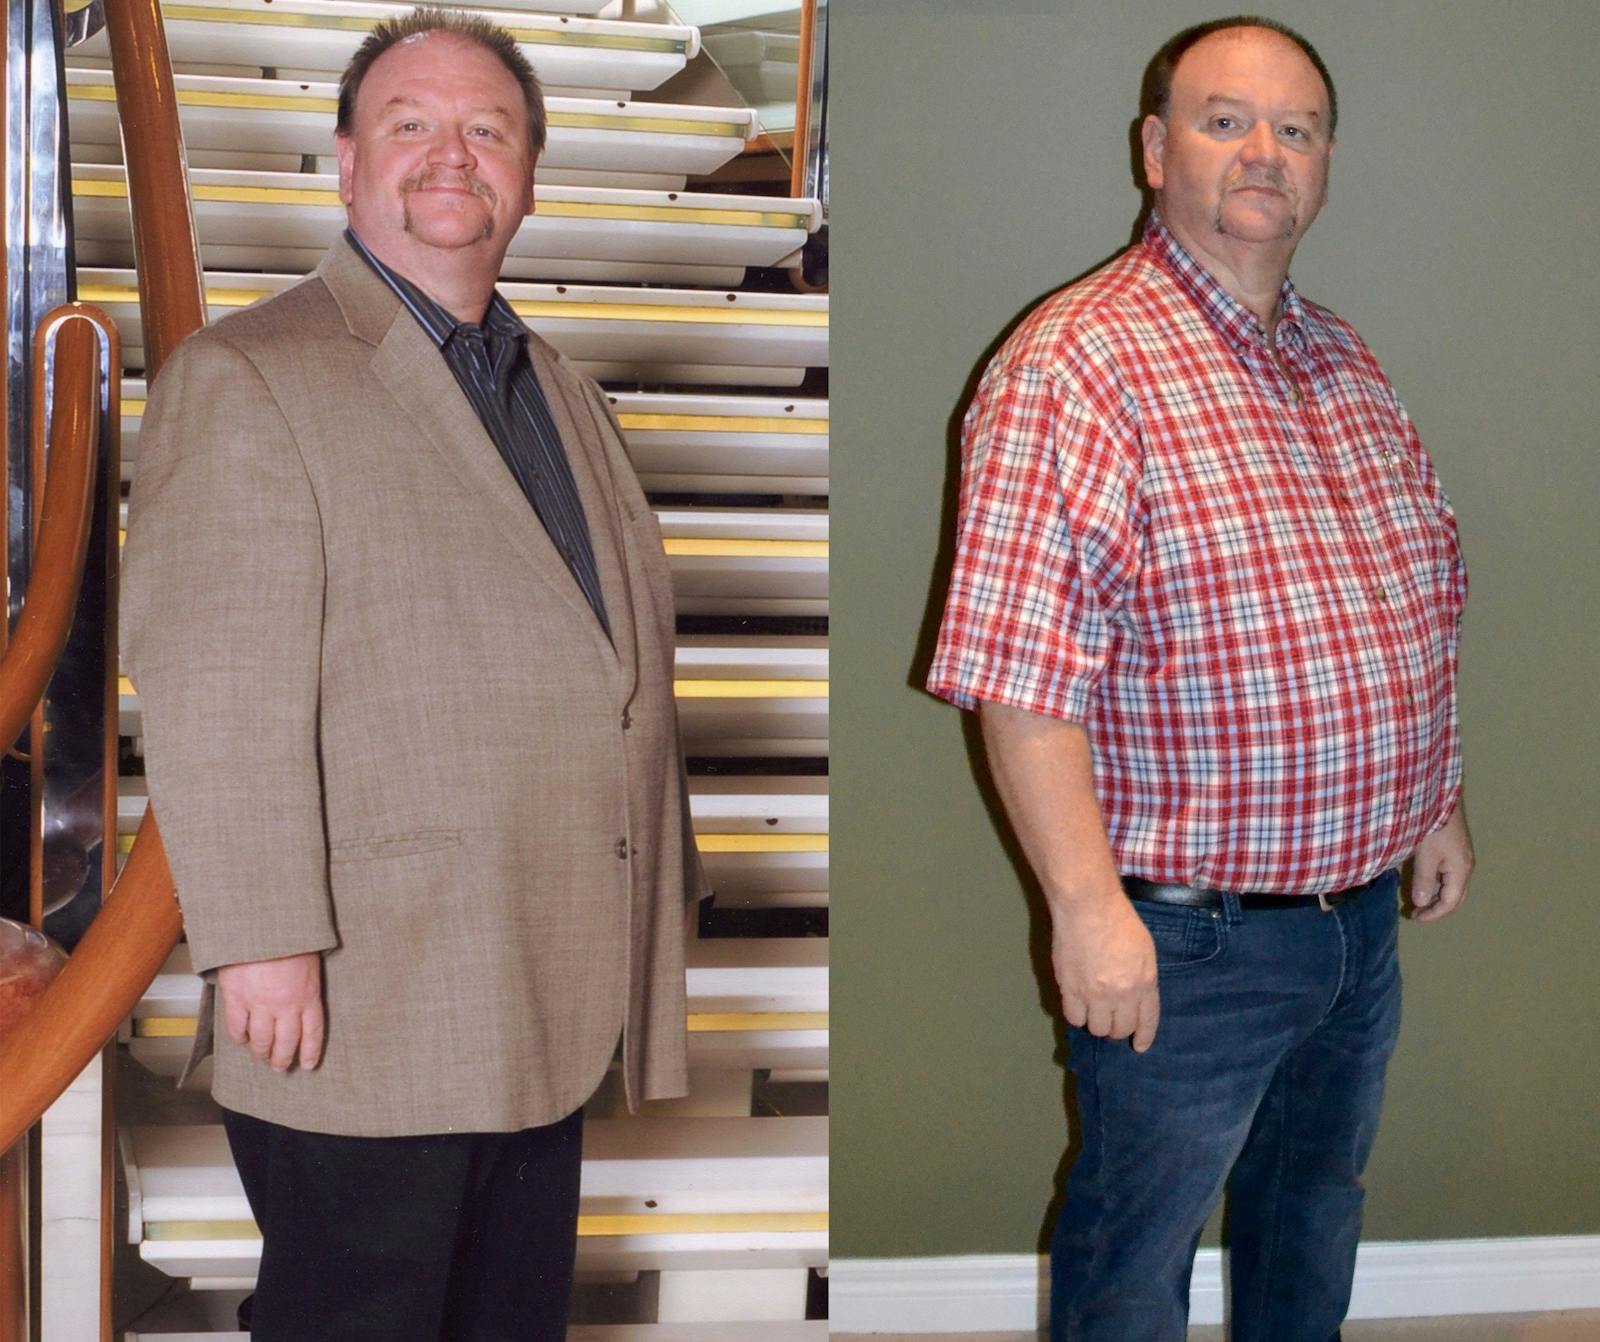 Before and after: 37 pounds,